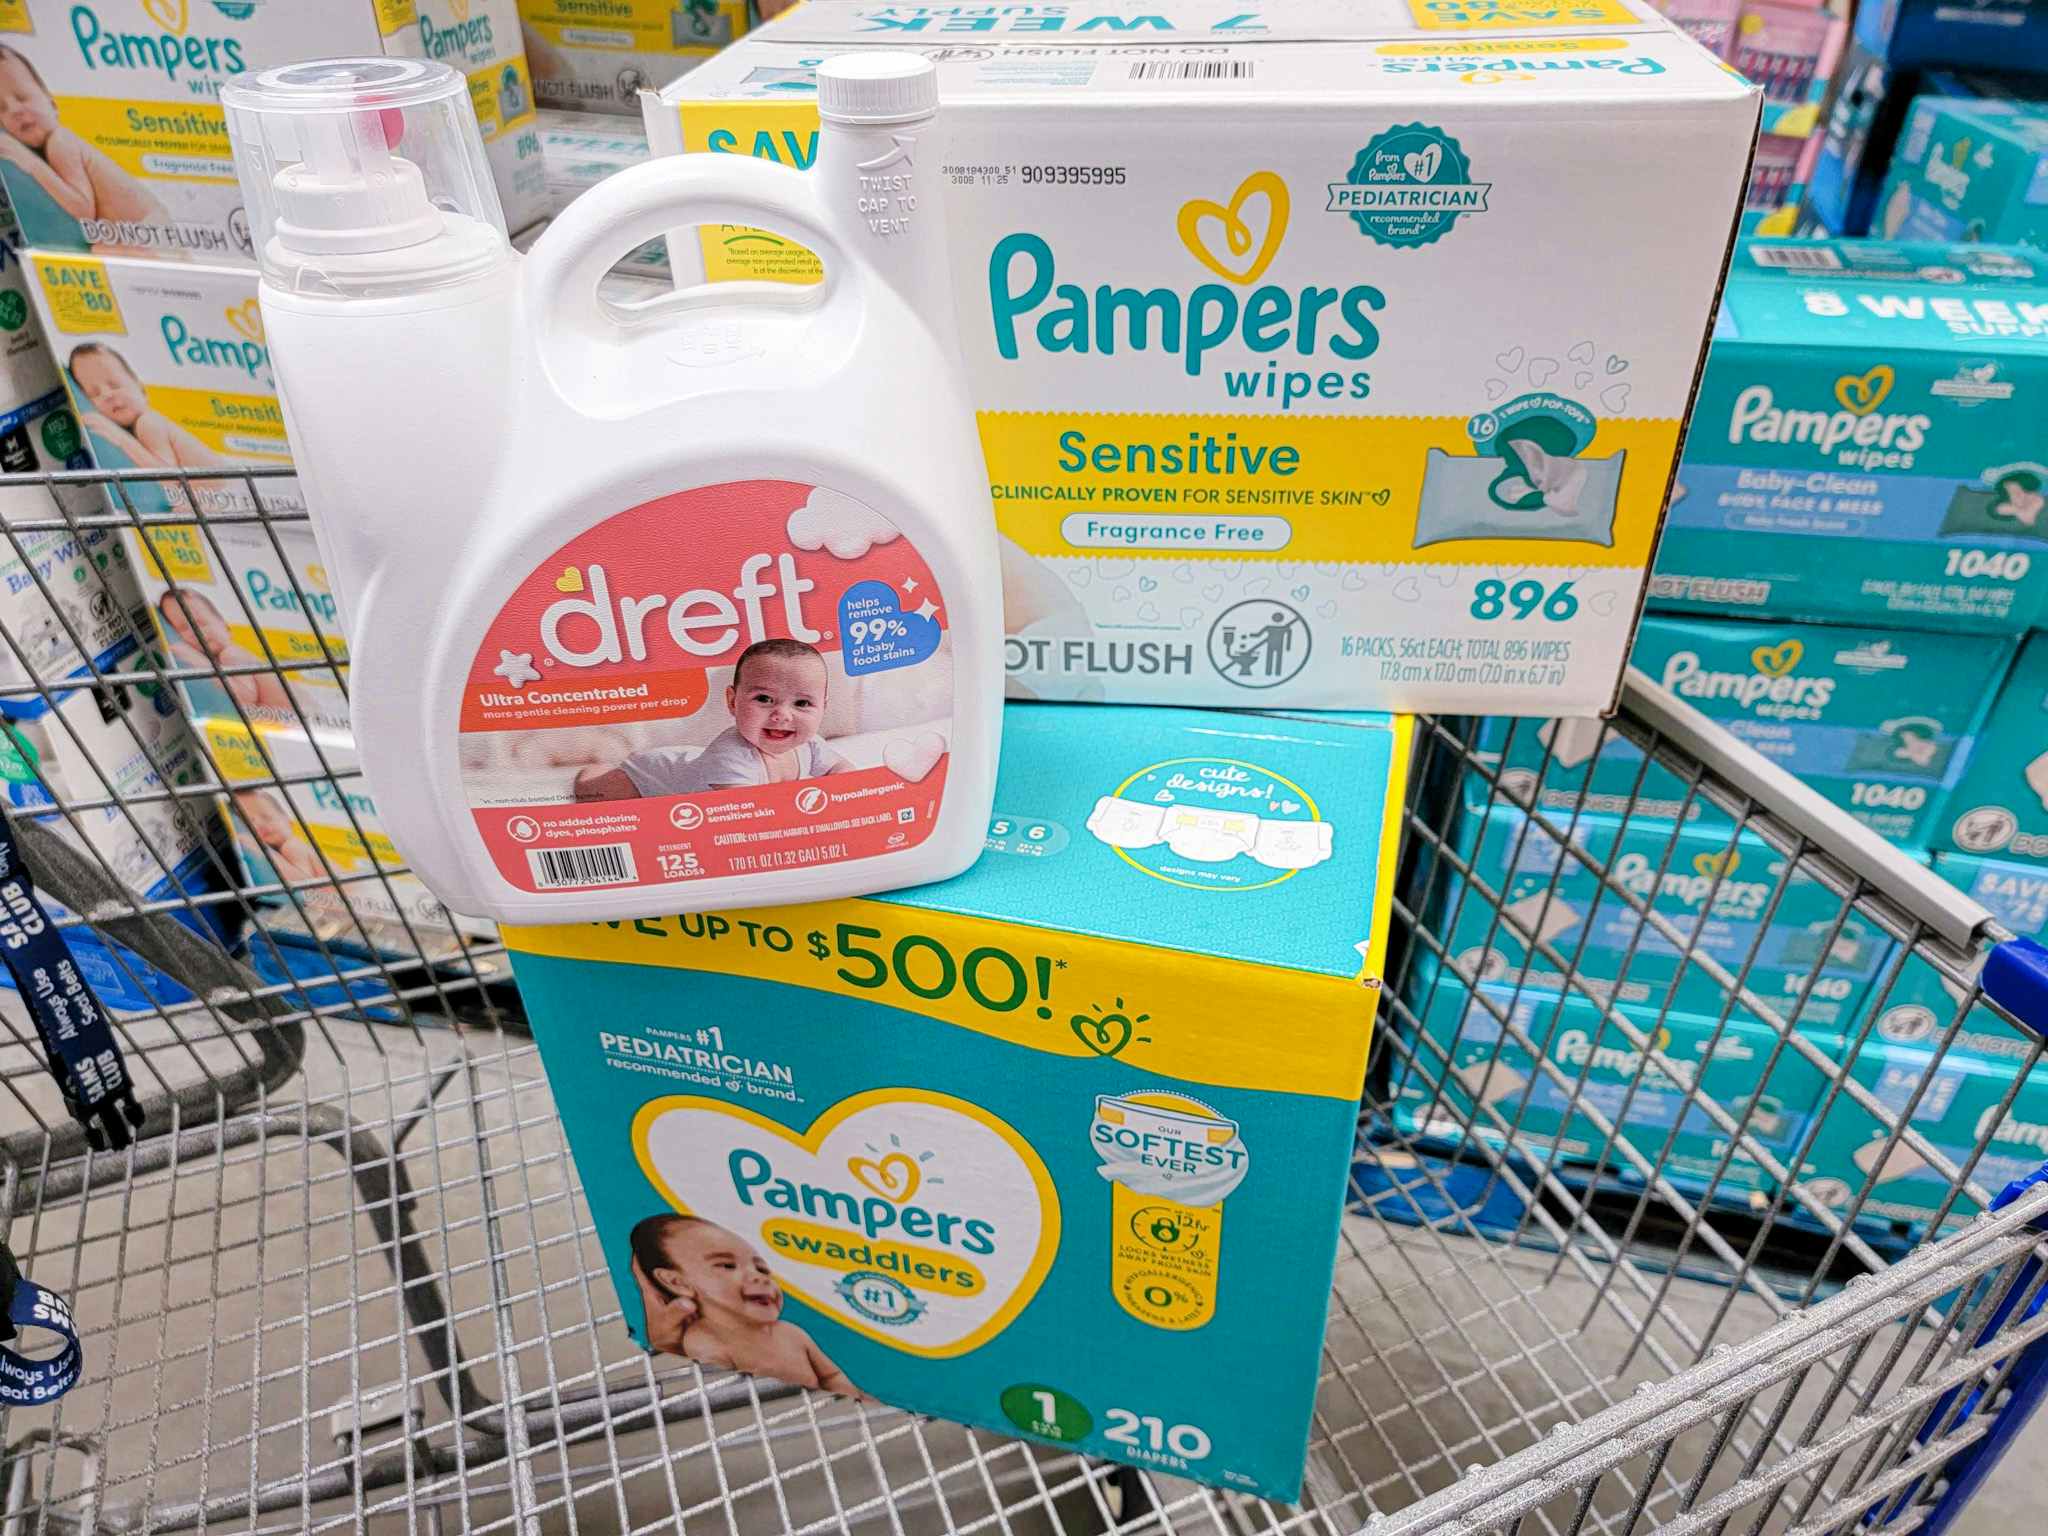 dreft detergent, pampers wipes and diapers in a cart